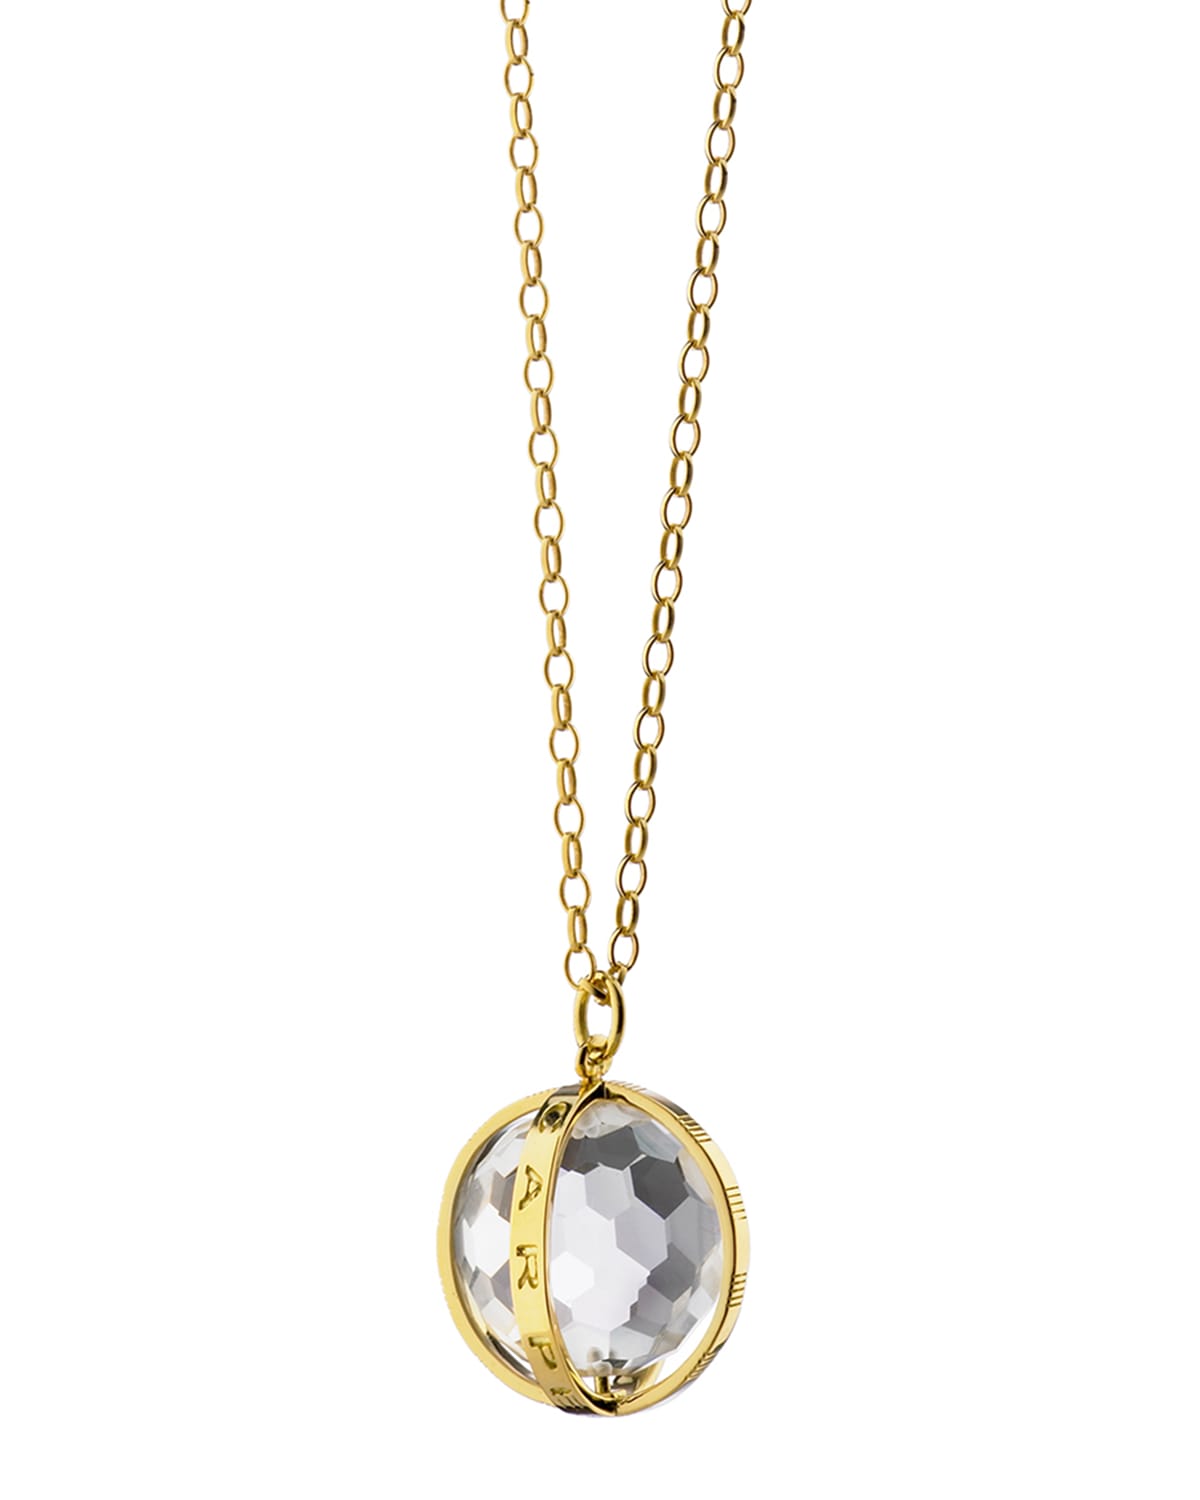 Infinity Diamond & 18K Gold Locket Necklace - Romantic Gifts for Her by Monica Rich Kosann